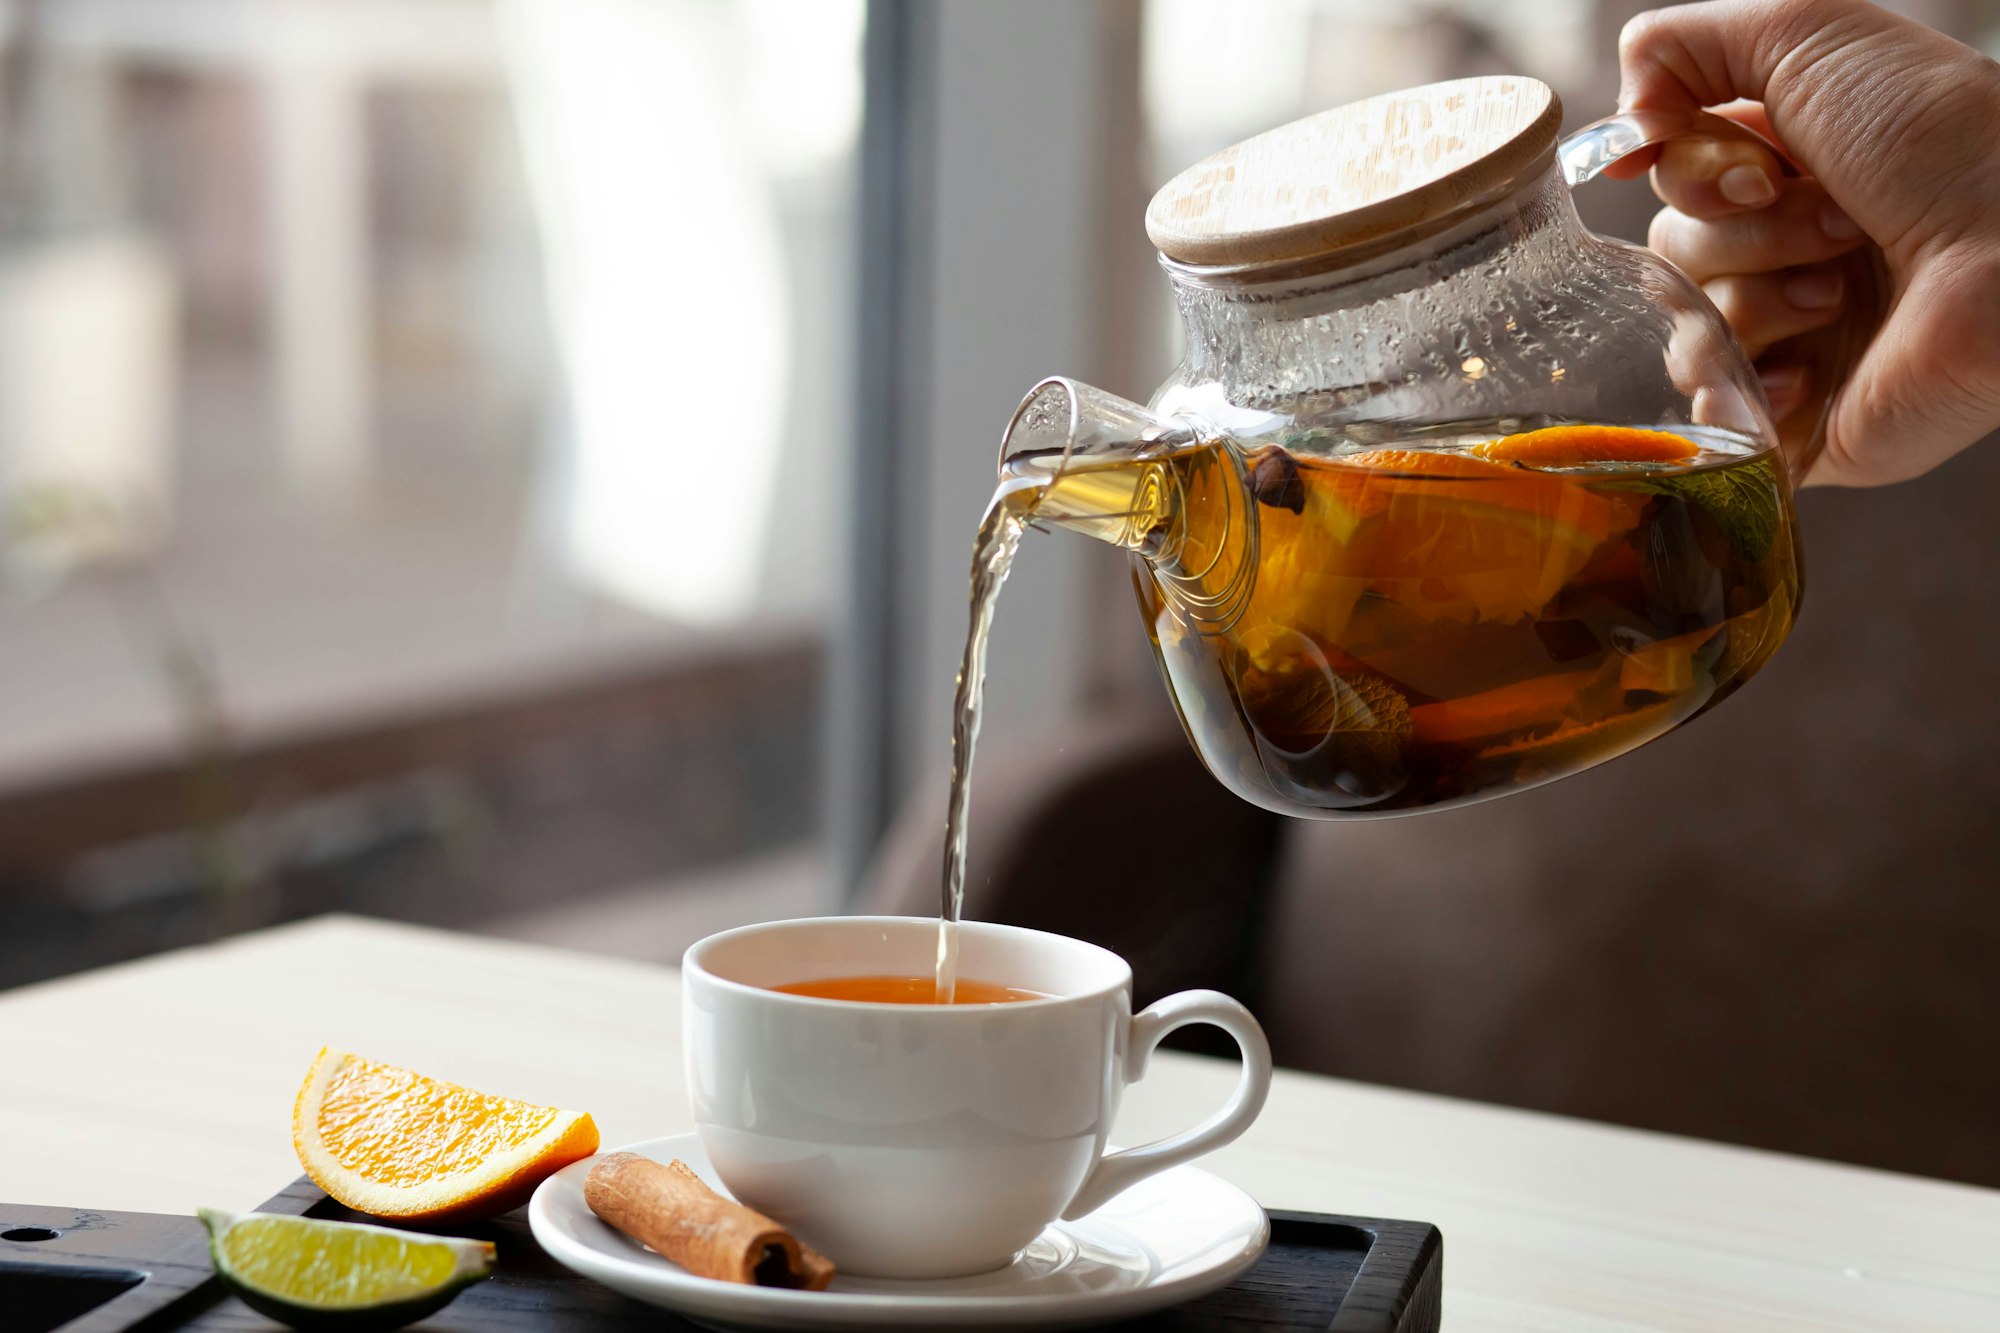 Is Green Tea With Citrus Good For You?